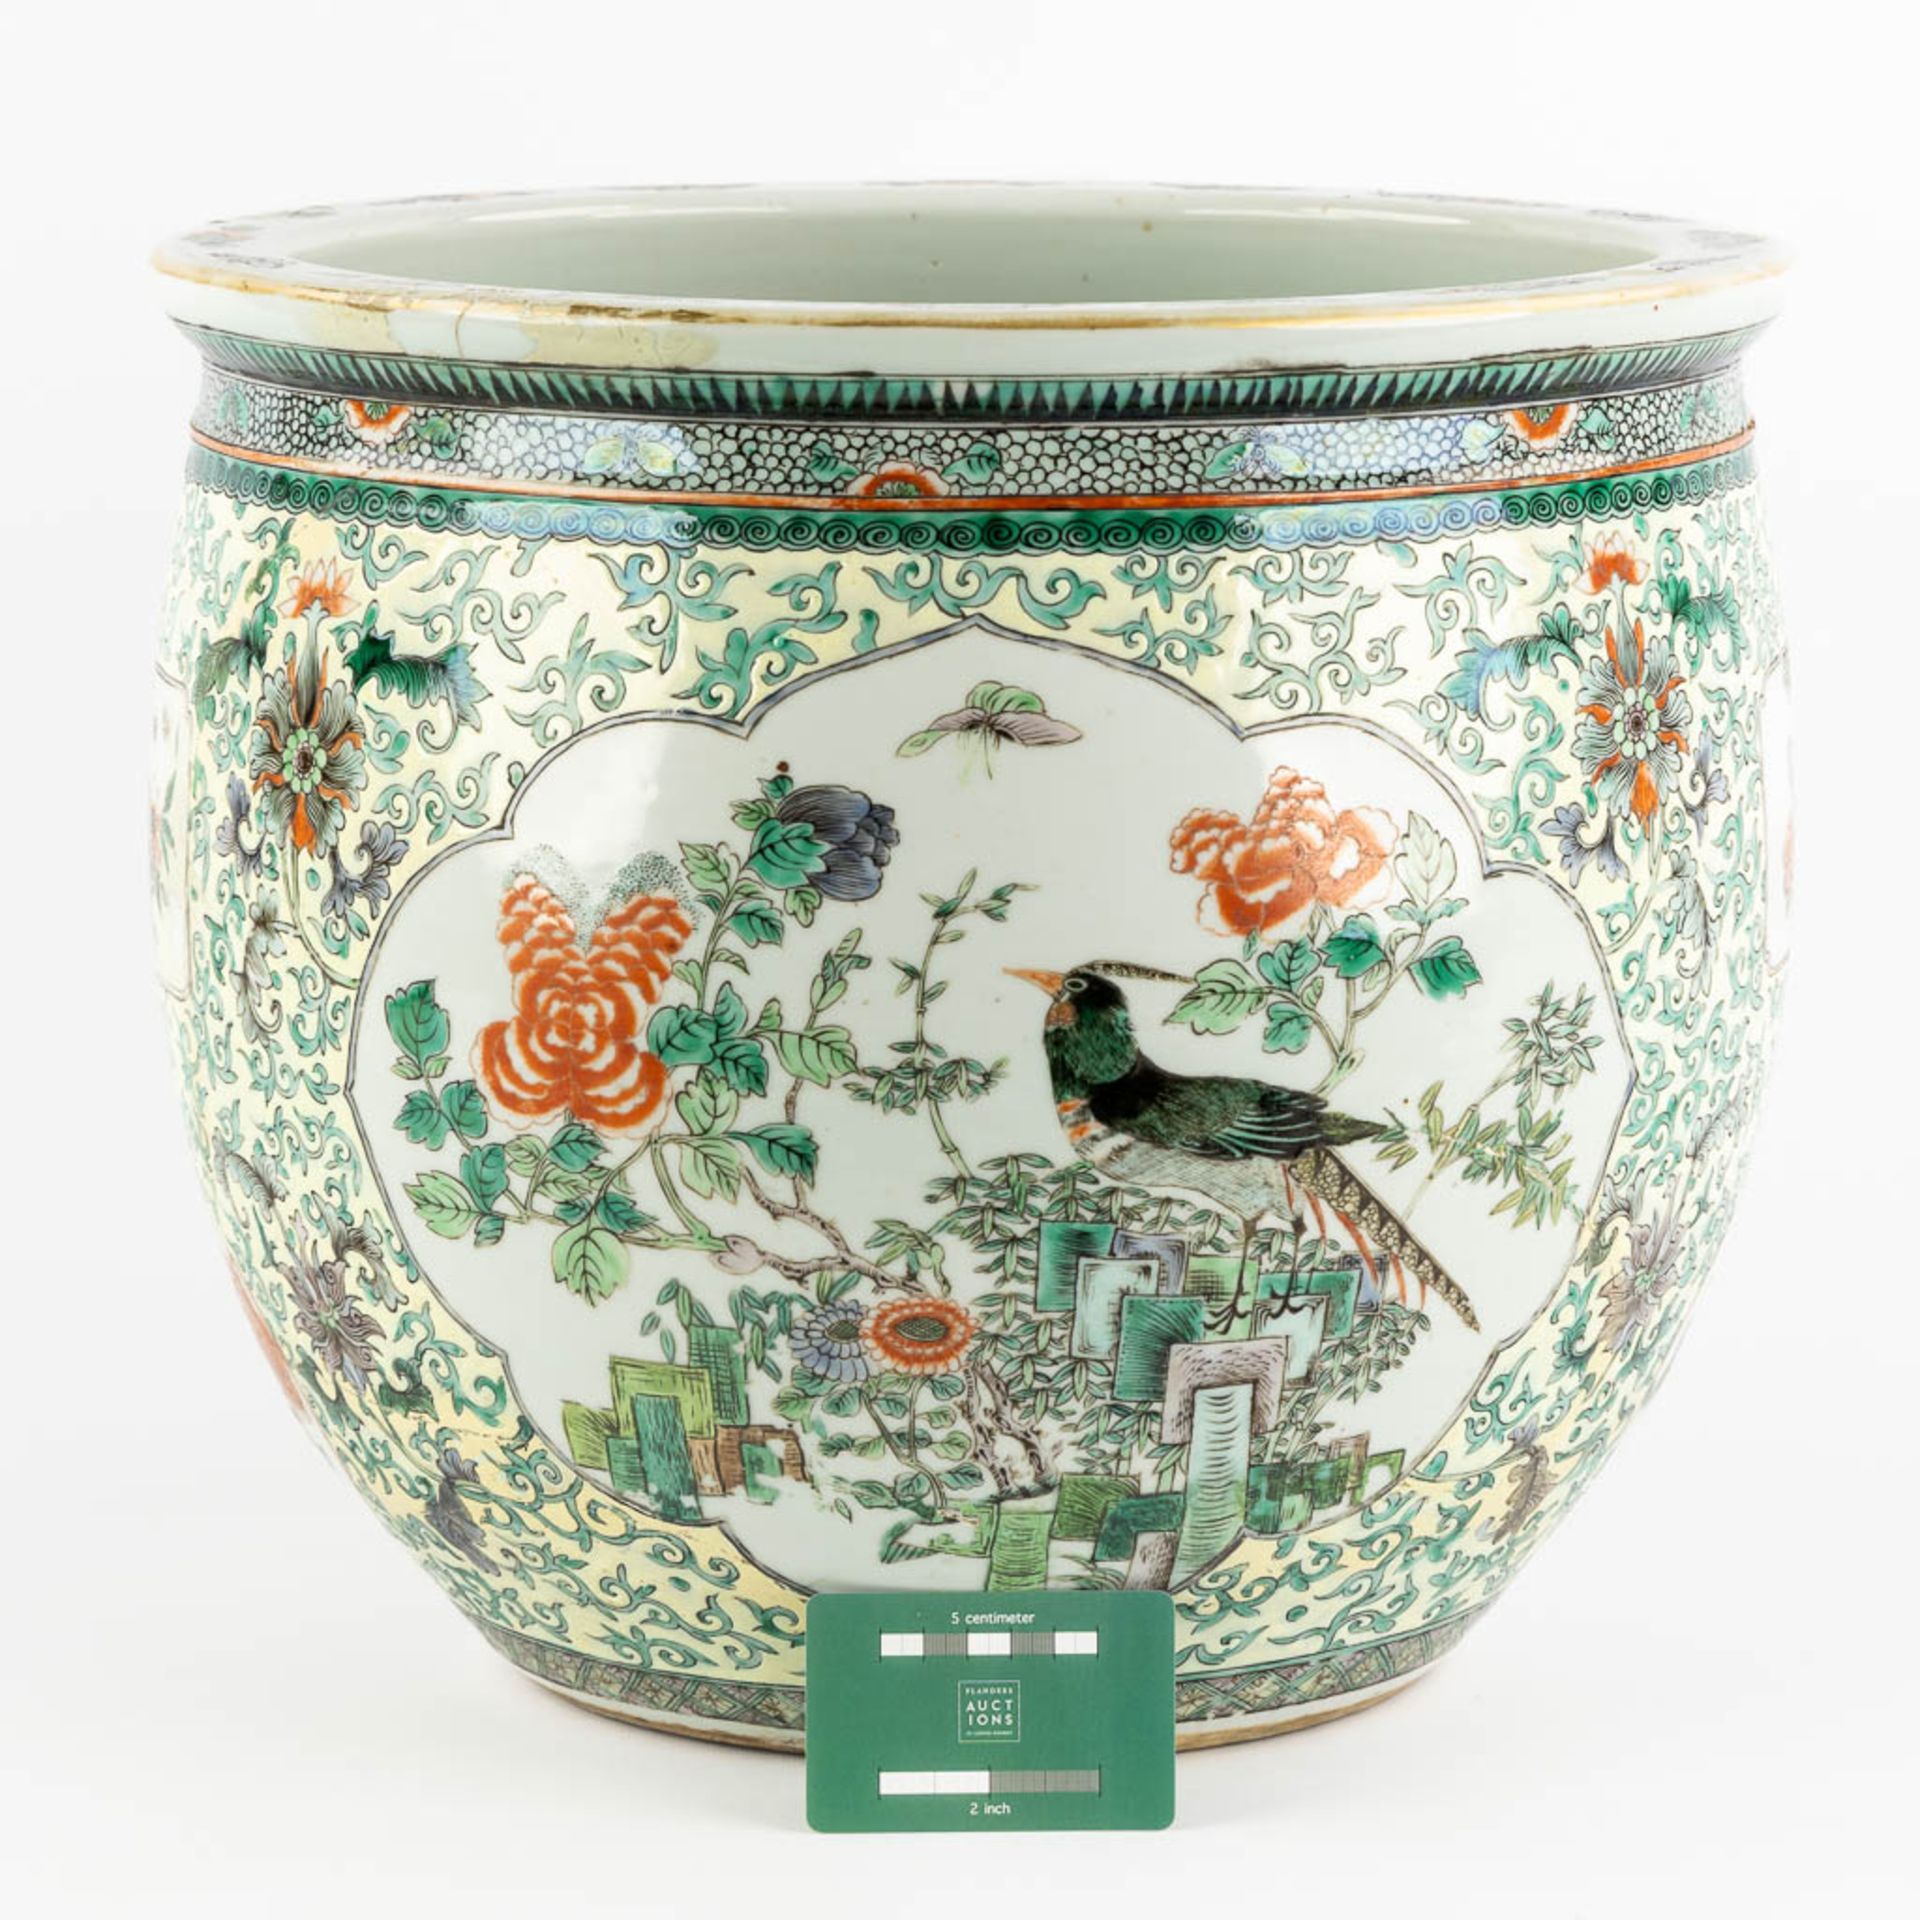 A Large Chinese Cache-Pot, Famille Verte decorated with fauna and flora. 19th C. (H:35 x D:40 cm) - Bild 2 aus 14